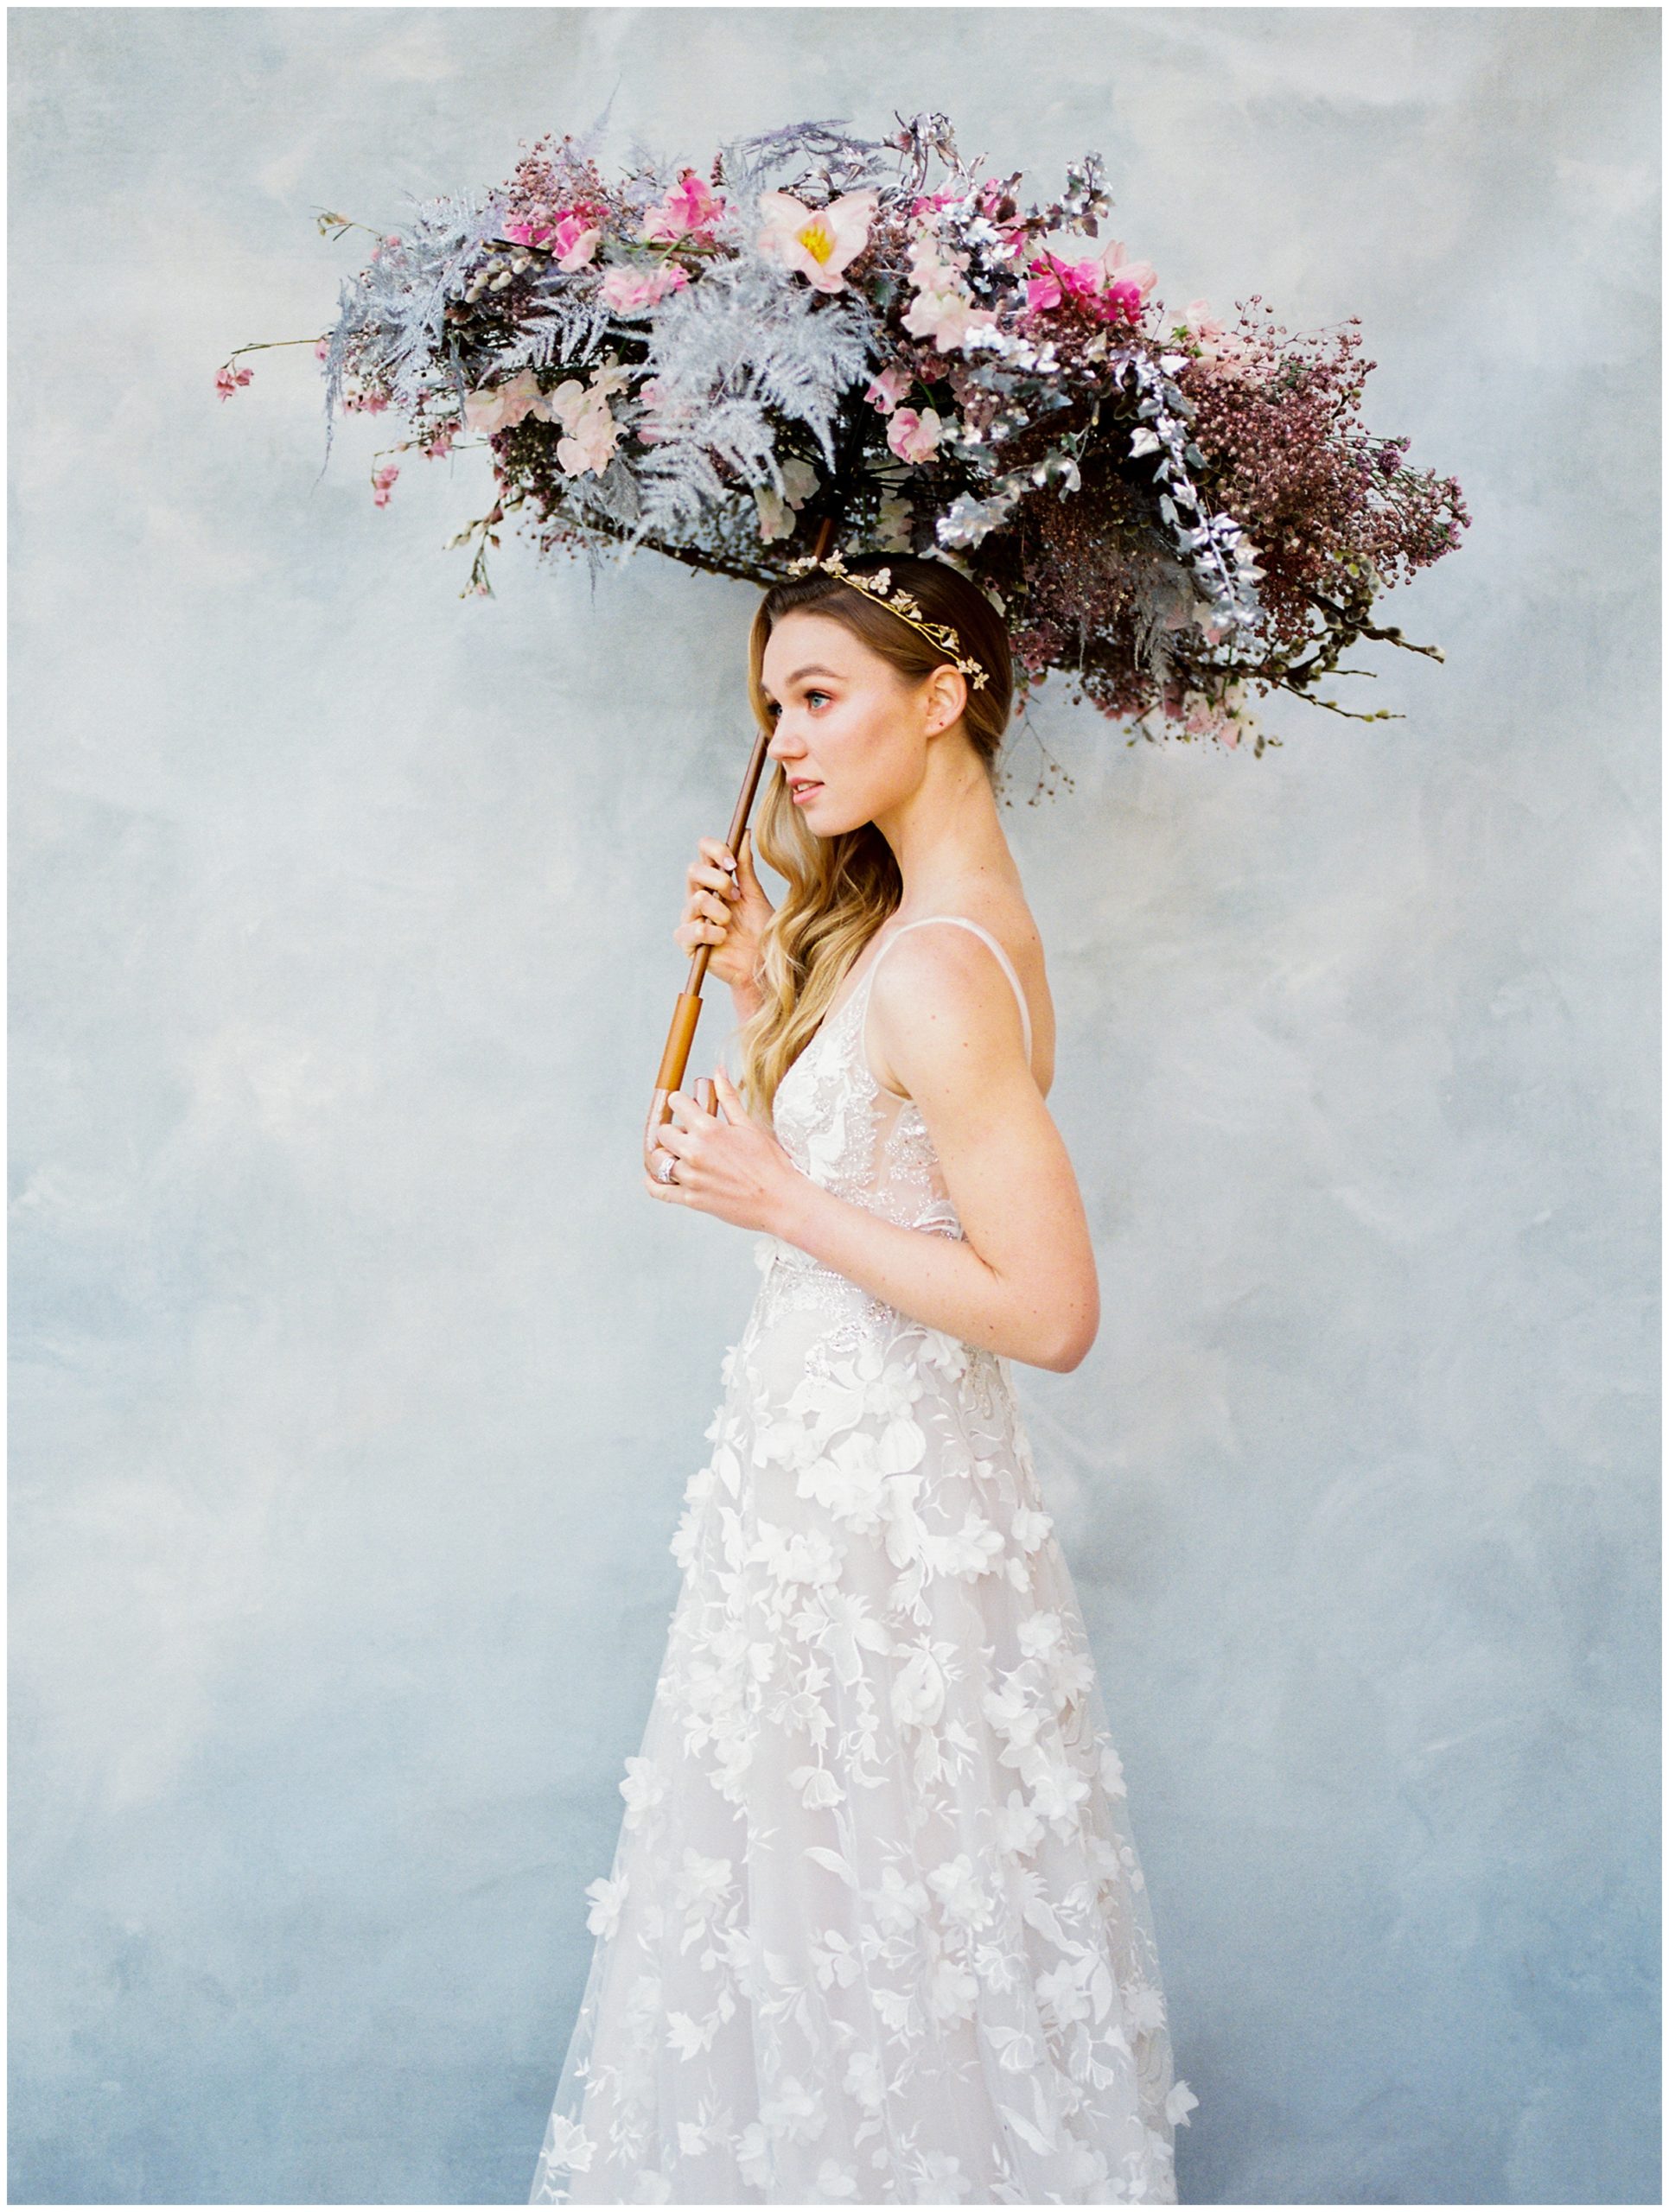 Floral umbrella by Angelica Fleur - Photographed by Jennifer Clapp Photography